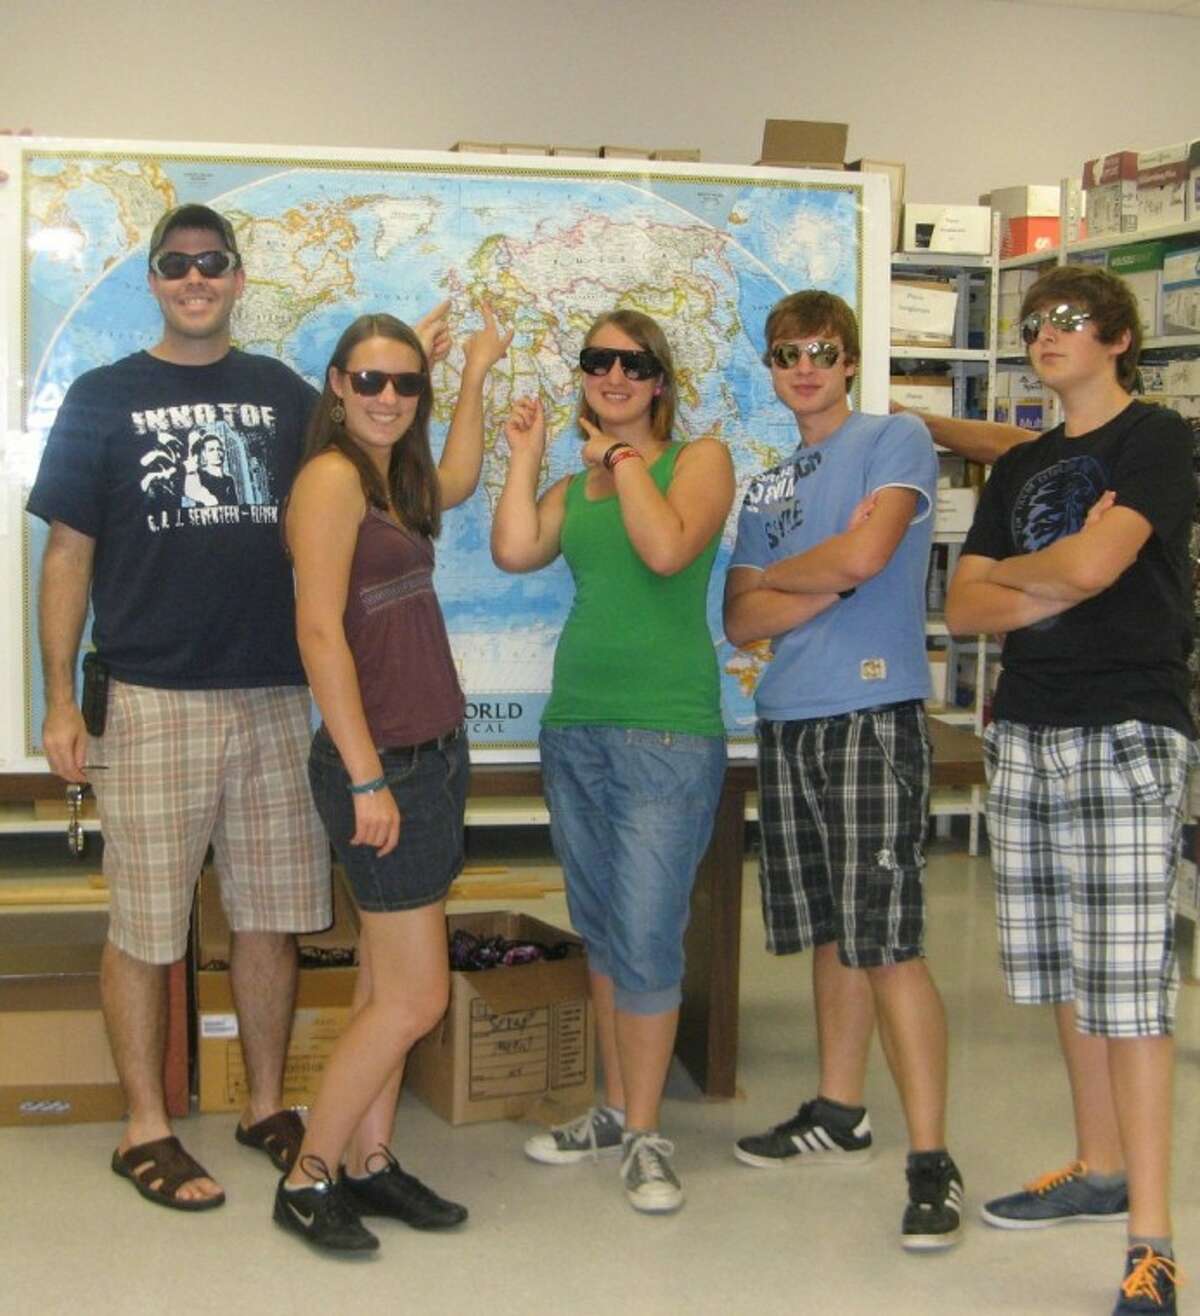 German exchange students with the First United Methodist Church of Conroe volunteered for a day at the Conroe Noon Lions Club Eyeglass Recycling Center. For their efforts, students got to choose a cool set of sunglasses. Pictured (left to right) are Youth Director Jonathan Davis, Franzi Skiewski, Michal Burkhardt, Rafael Burkhardt and Ruben Gunzenhauser.